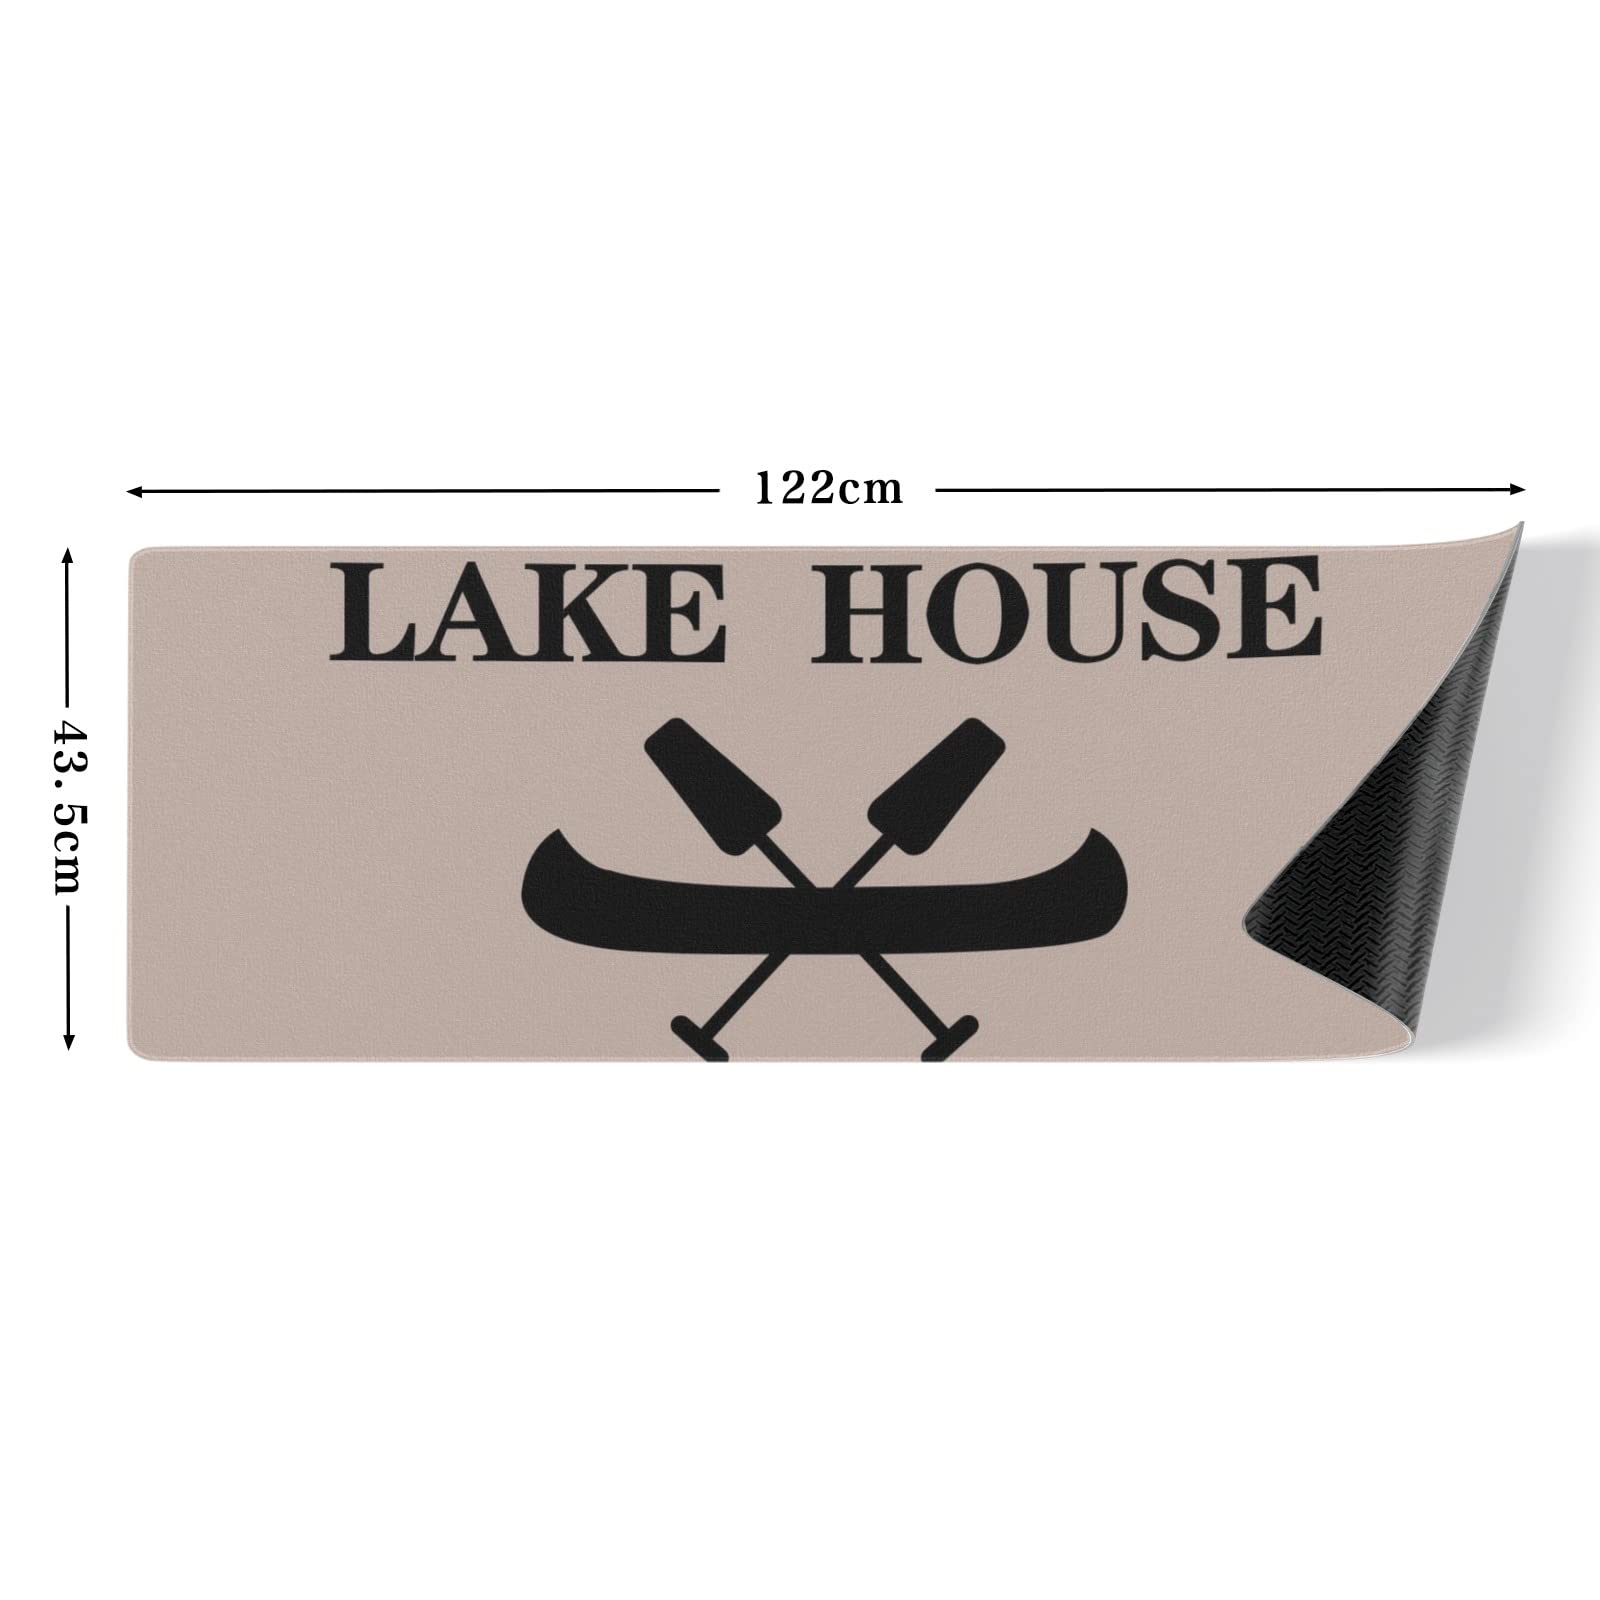 Lake House Personalized Kitchen Room Mat and Rug, Custom Floor Mat Anti-Slip Rugs for Kitchen, Floor Home, Office, Store, Laundry